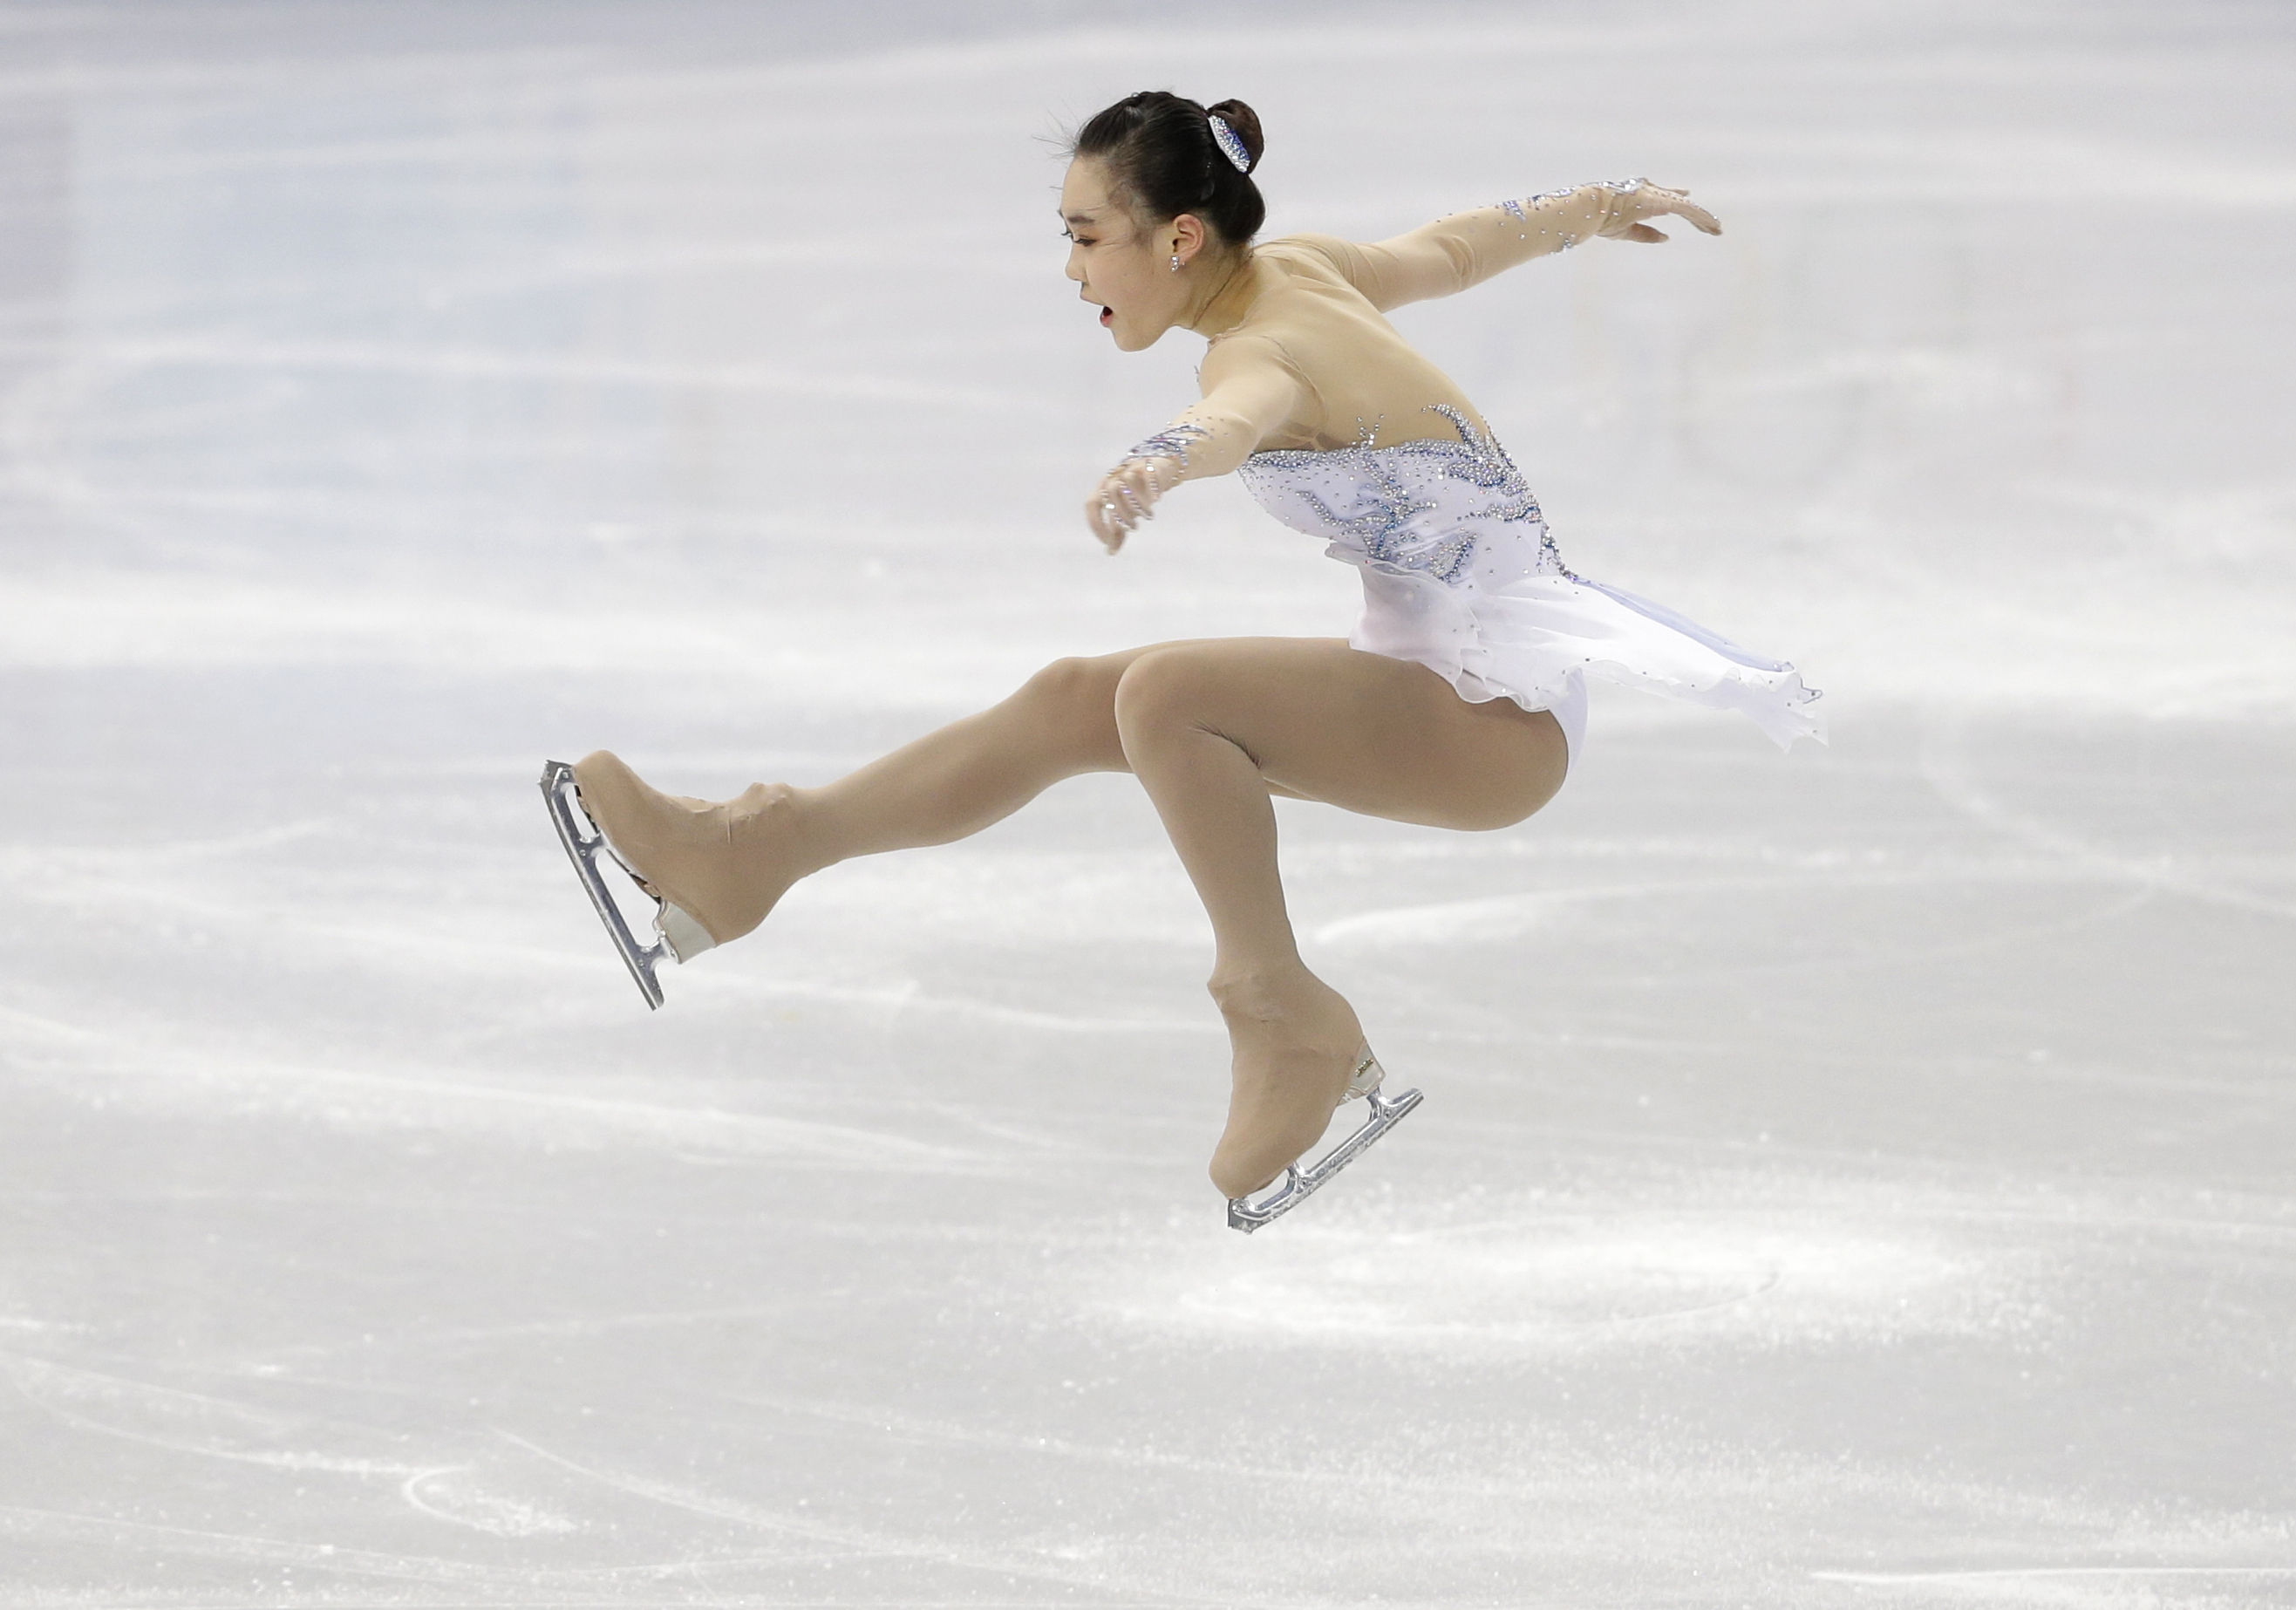 Park So-Youn of South Korea competes in the women's short program figure skating competition at the Iceberg Skating Palace during the 2014 Winter Olympics, Wednesday, Feb. 19, 2014, in Sochi, Russia. (AP Photo/Darron Cummings)